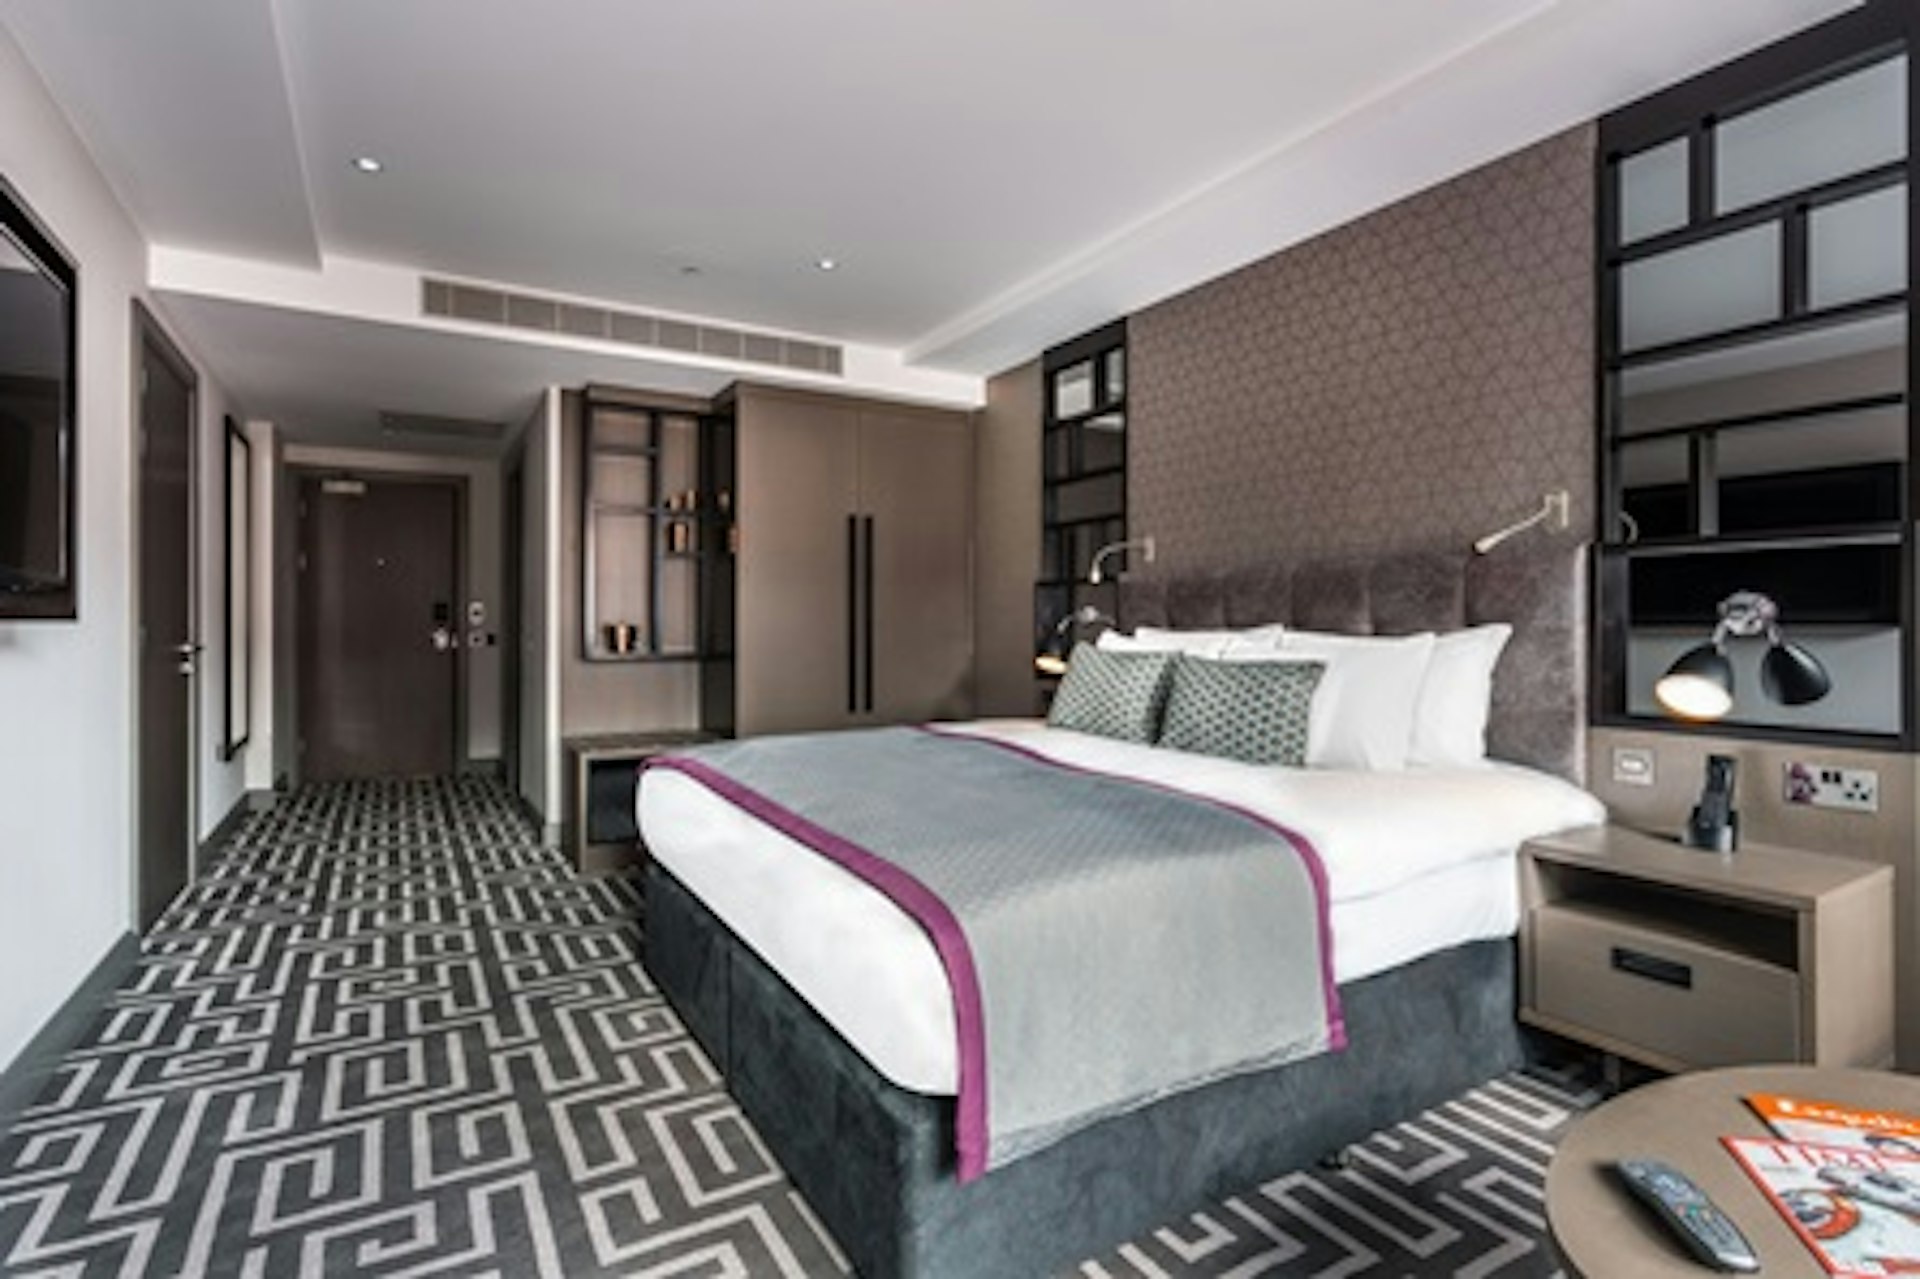 One Night London Break for Two at the 5* Courthouse Hotel, Shoreditch 1